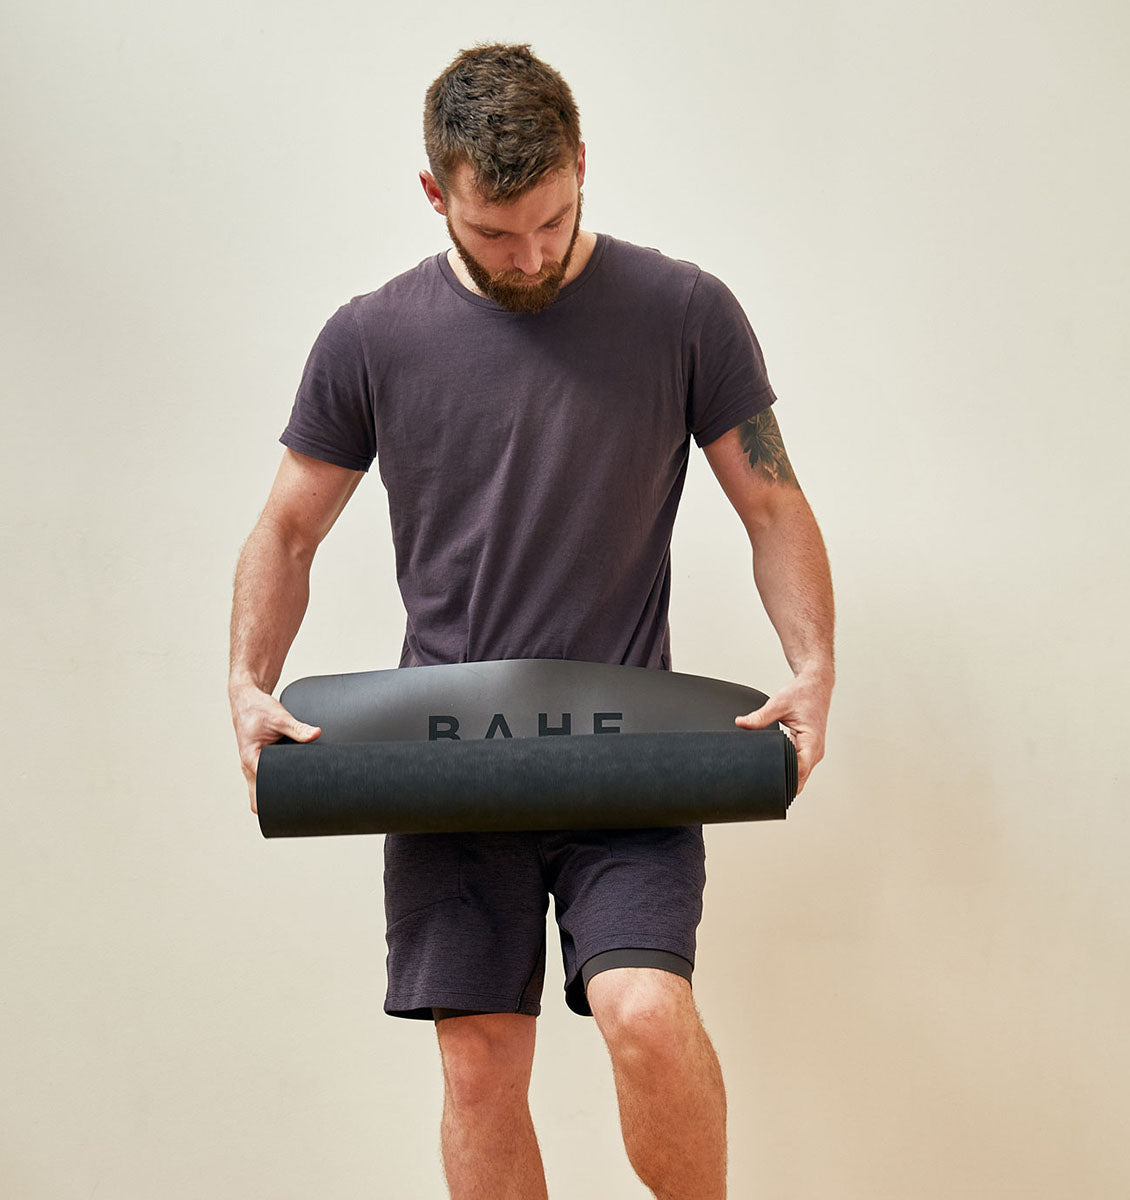 BAHE Power Hold Yoga Mat - 4mm - Anthracite - Lifestyle - 6